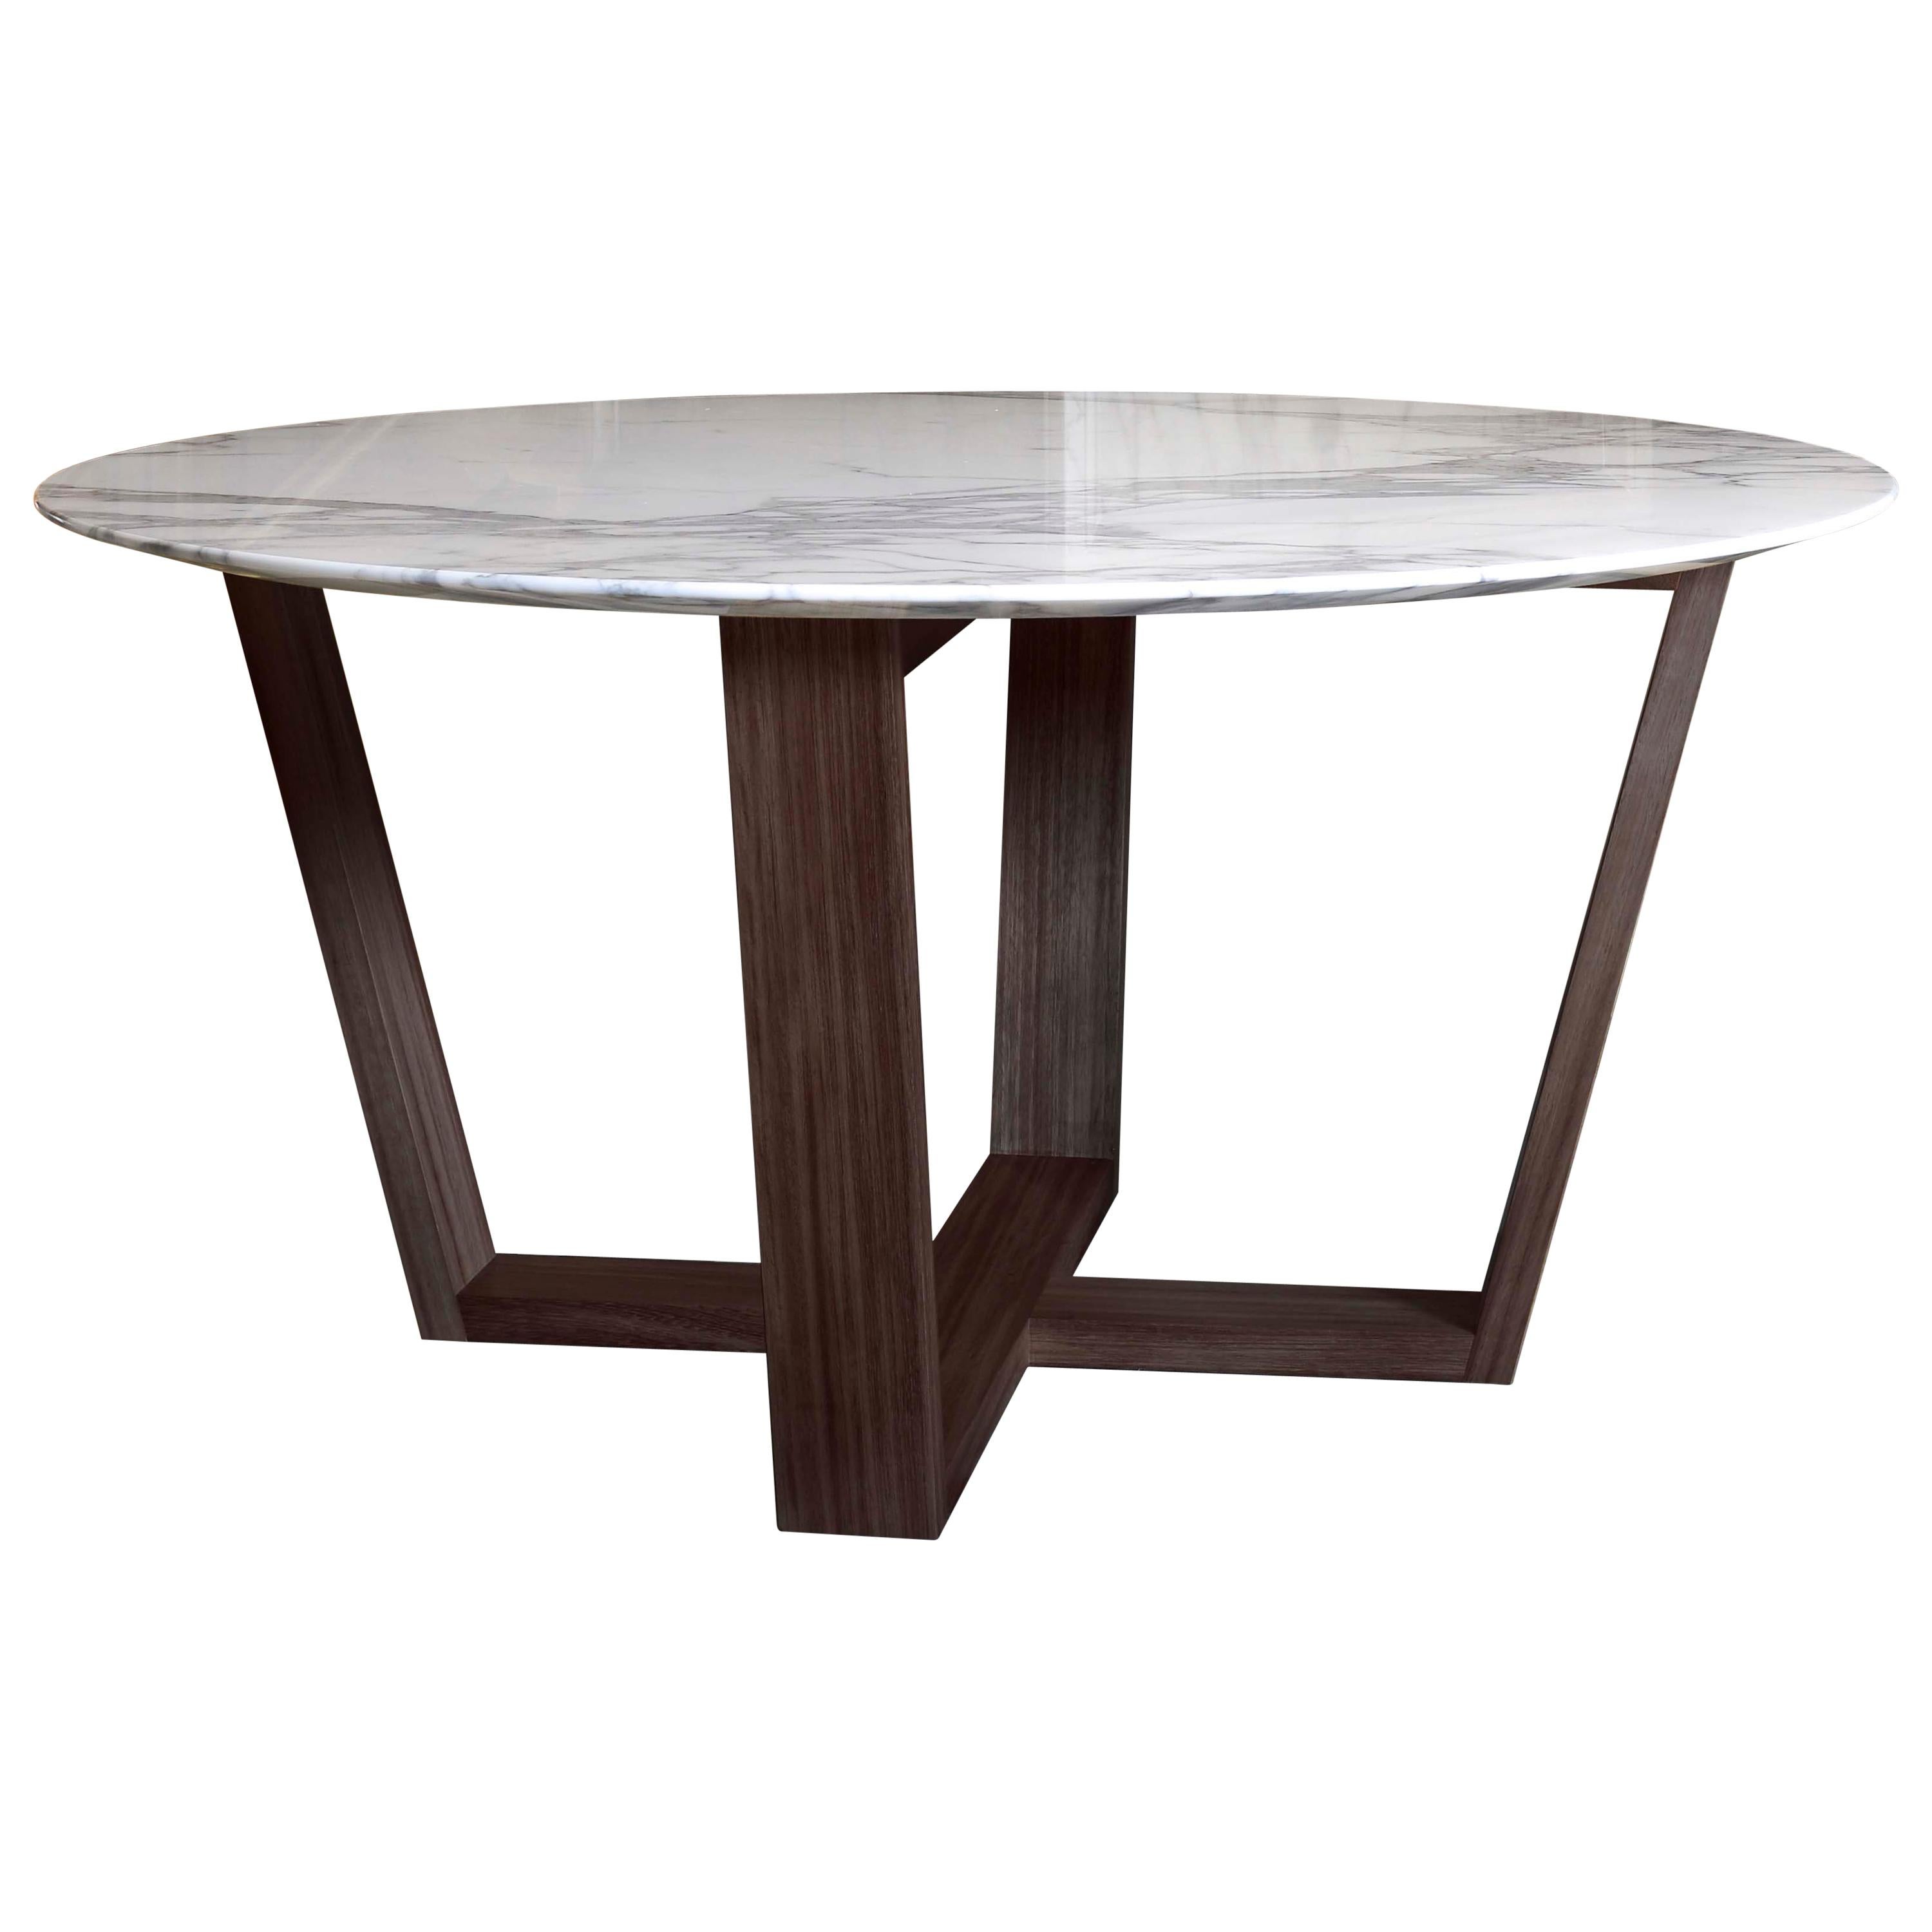 21st Century White Carrara Marble Teakwood Round Basket Outdoor Dining Table For Sale